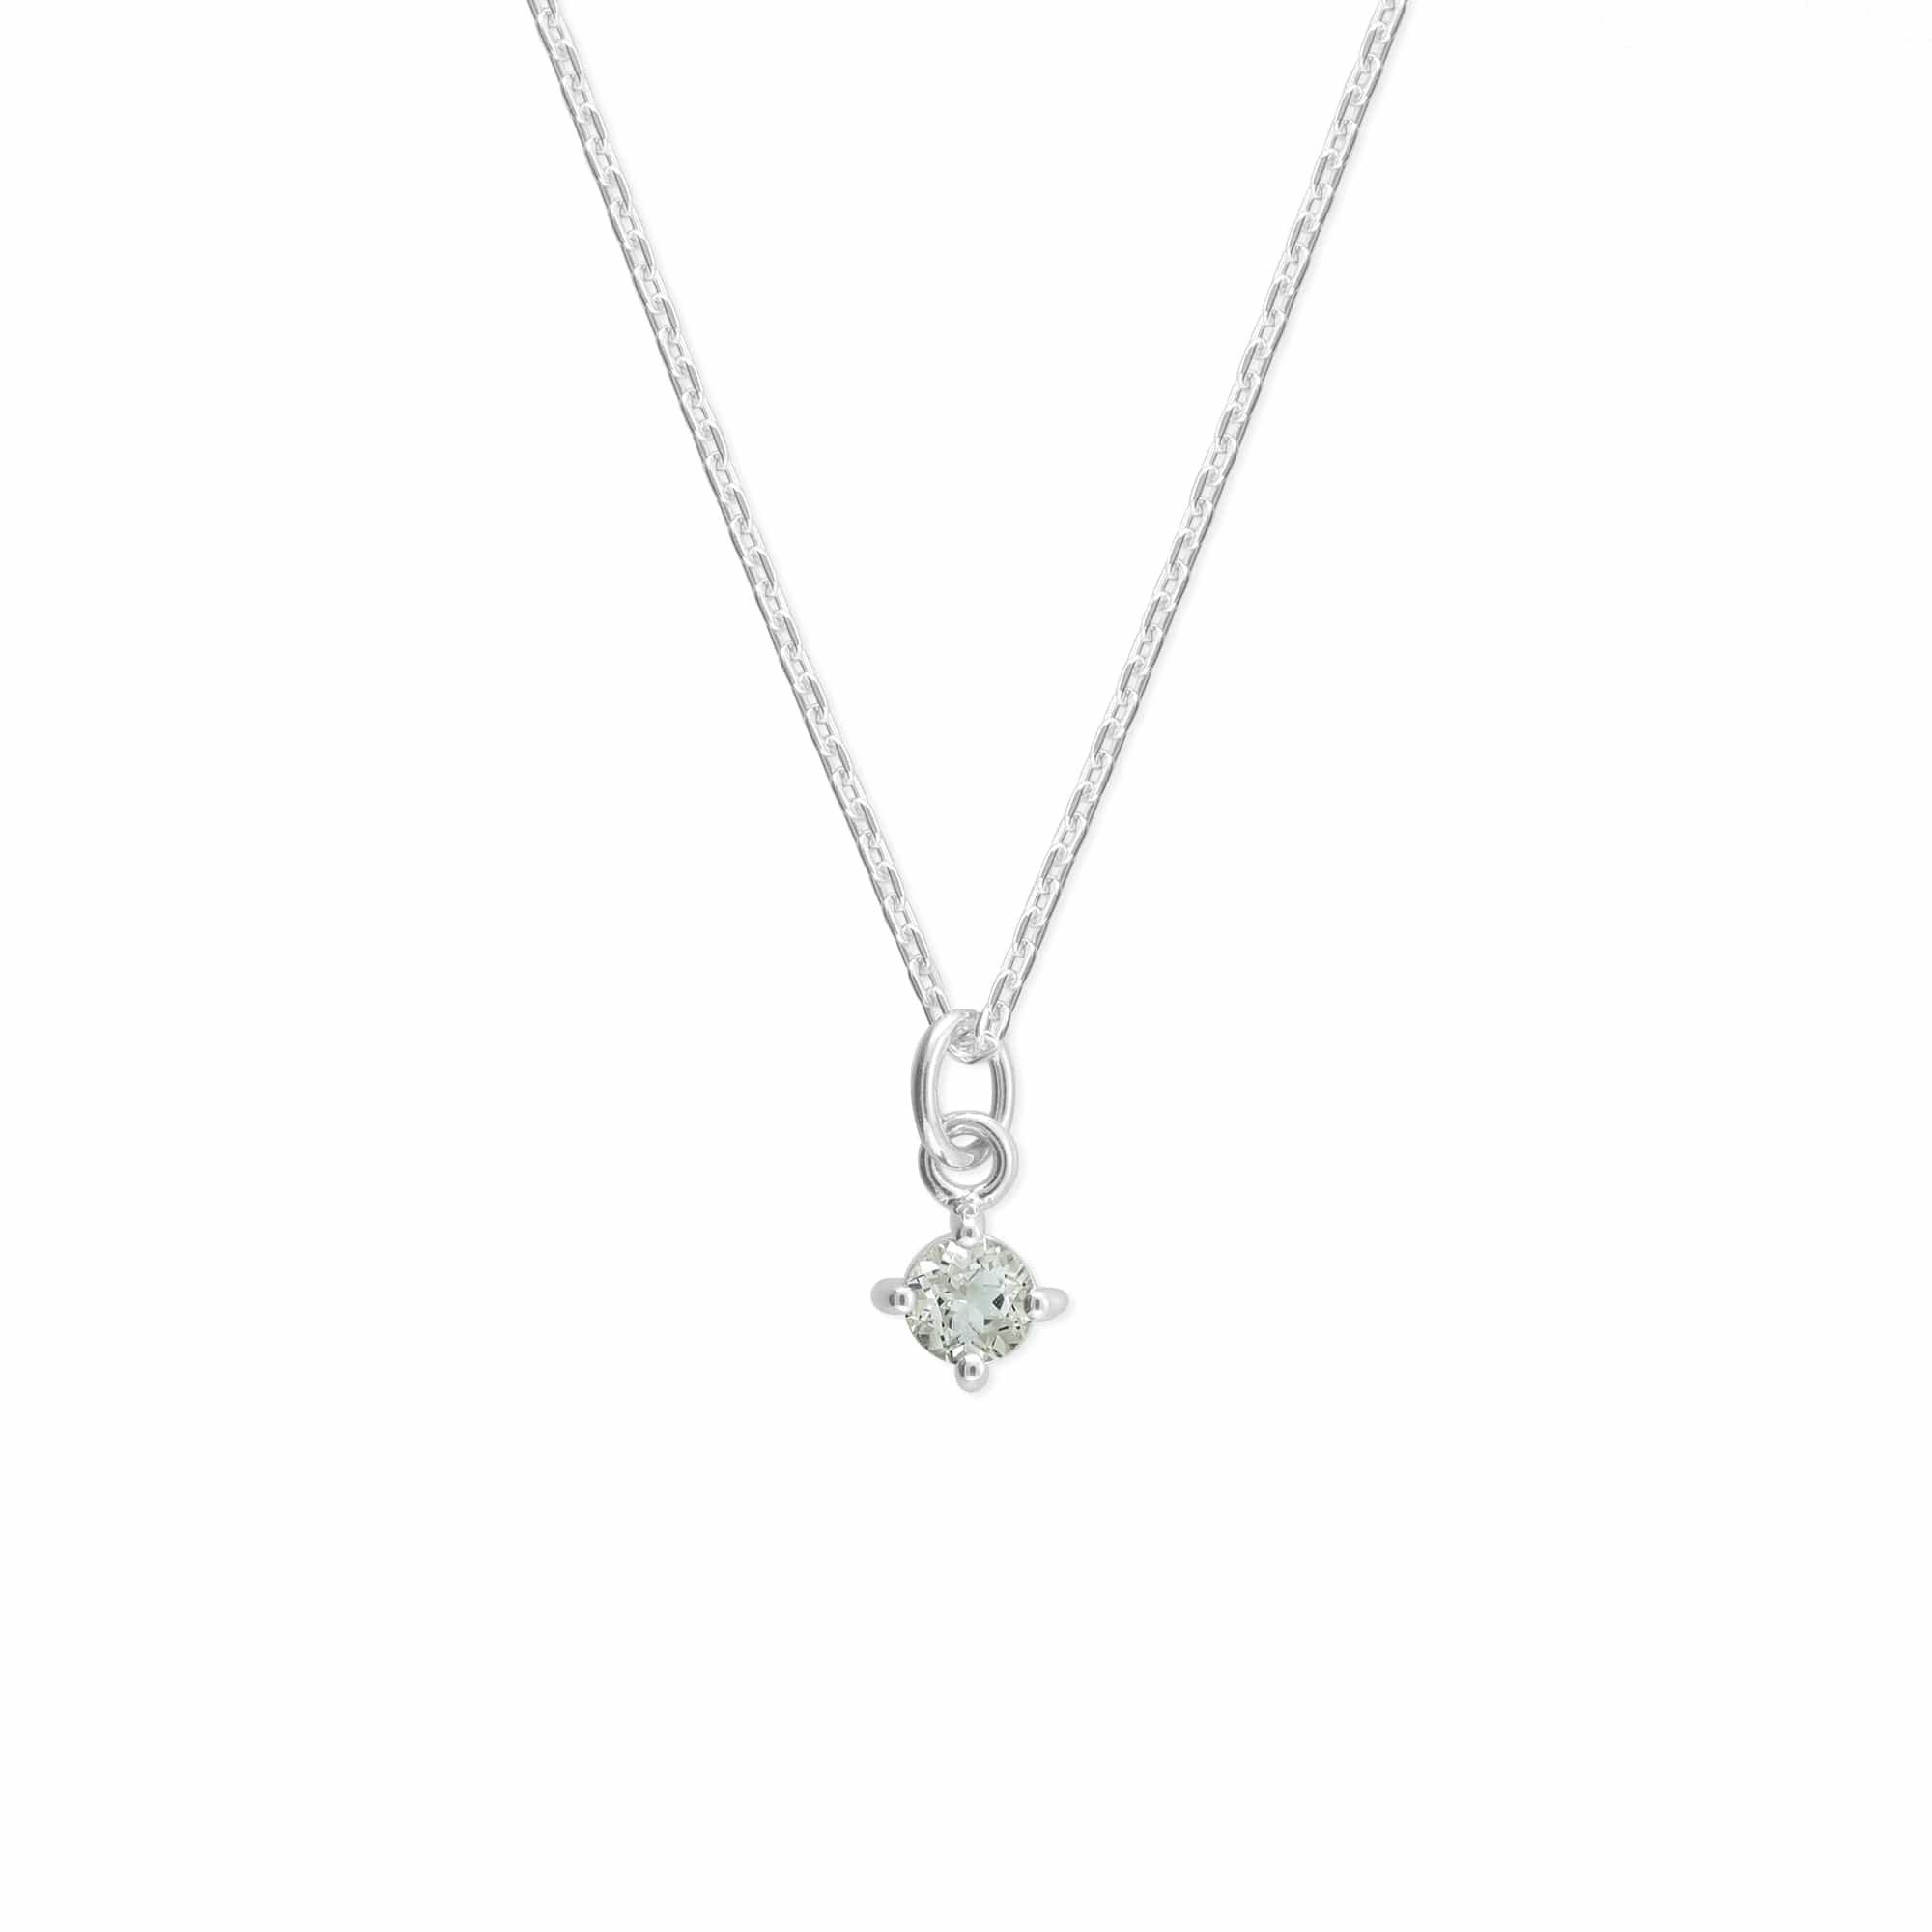 Boma Jewelry Necklaces White Topaz Colored Gemstone Necklace